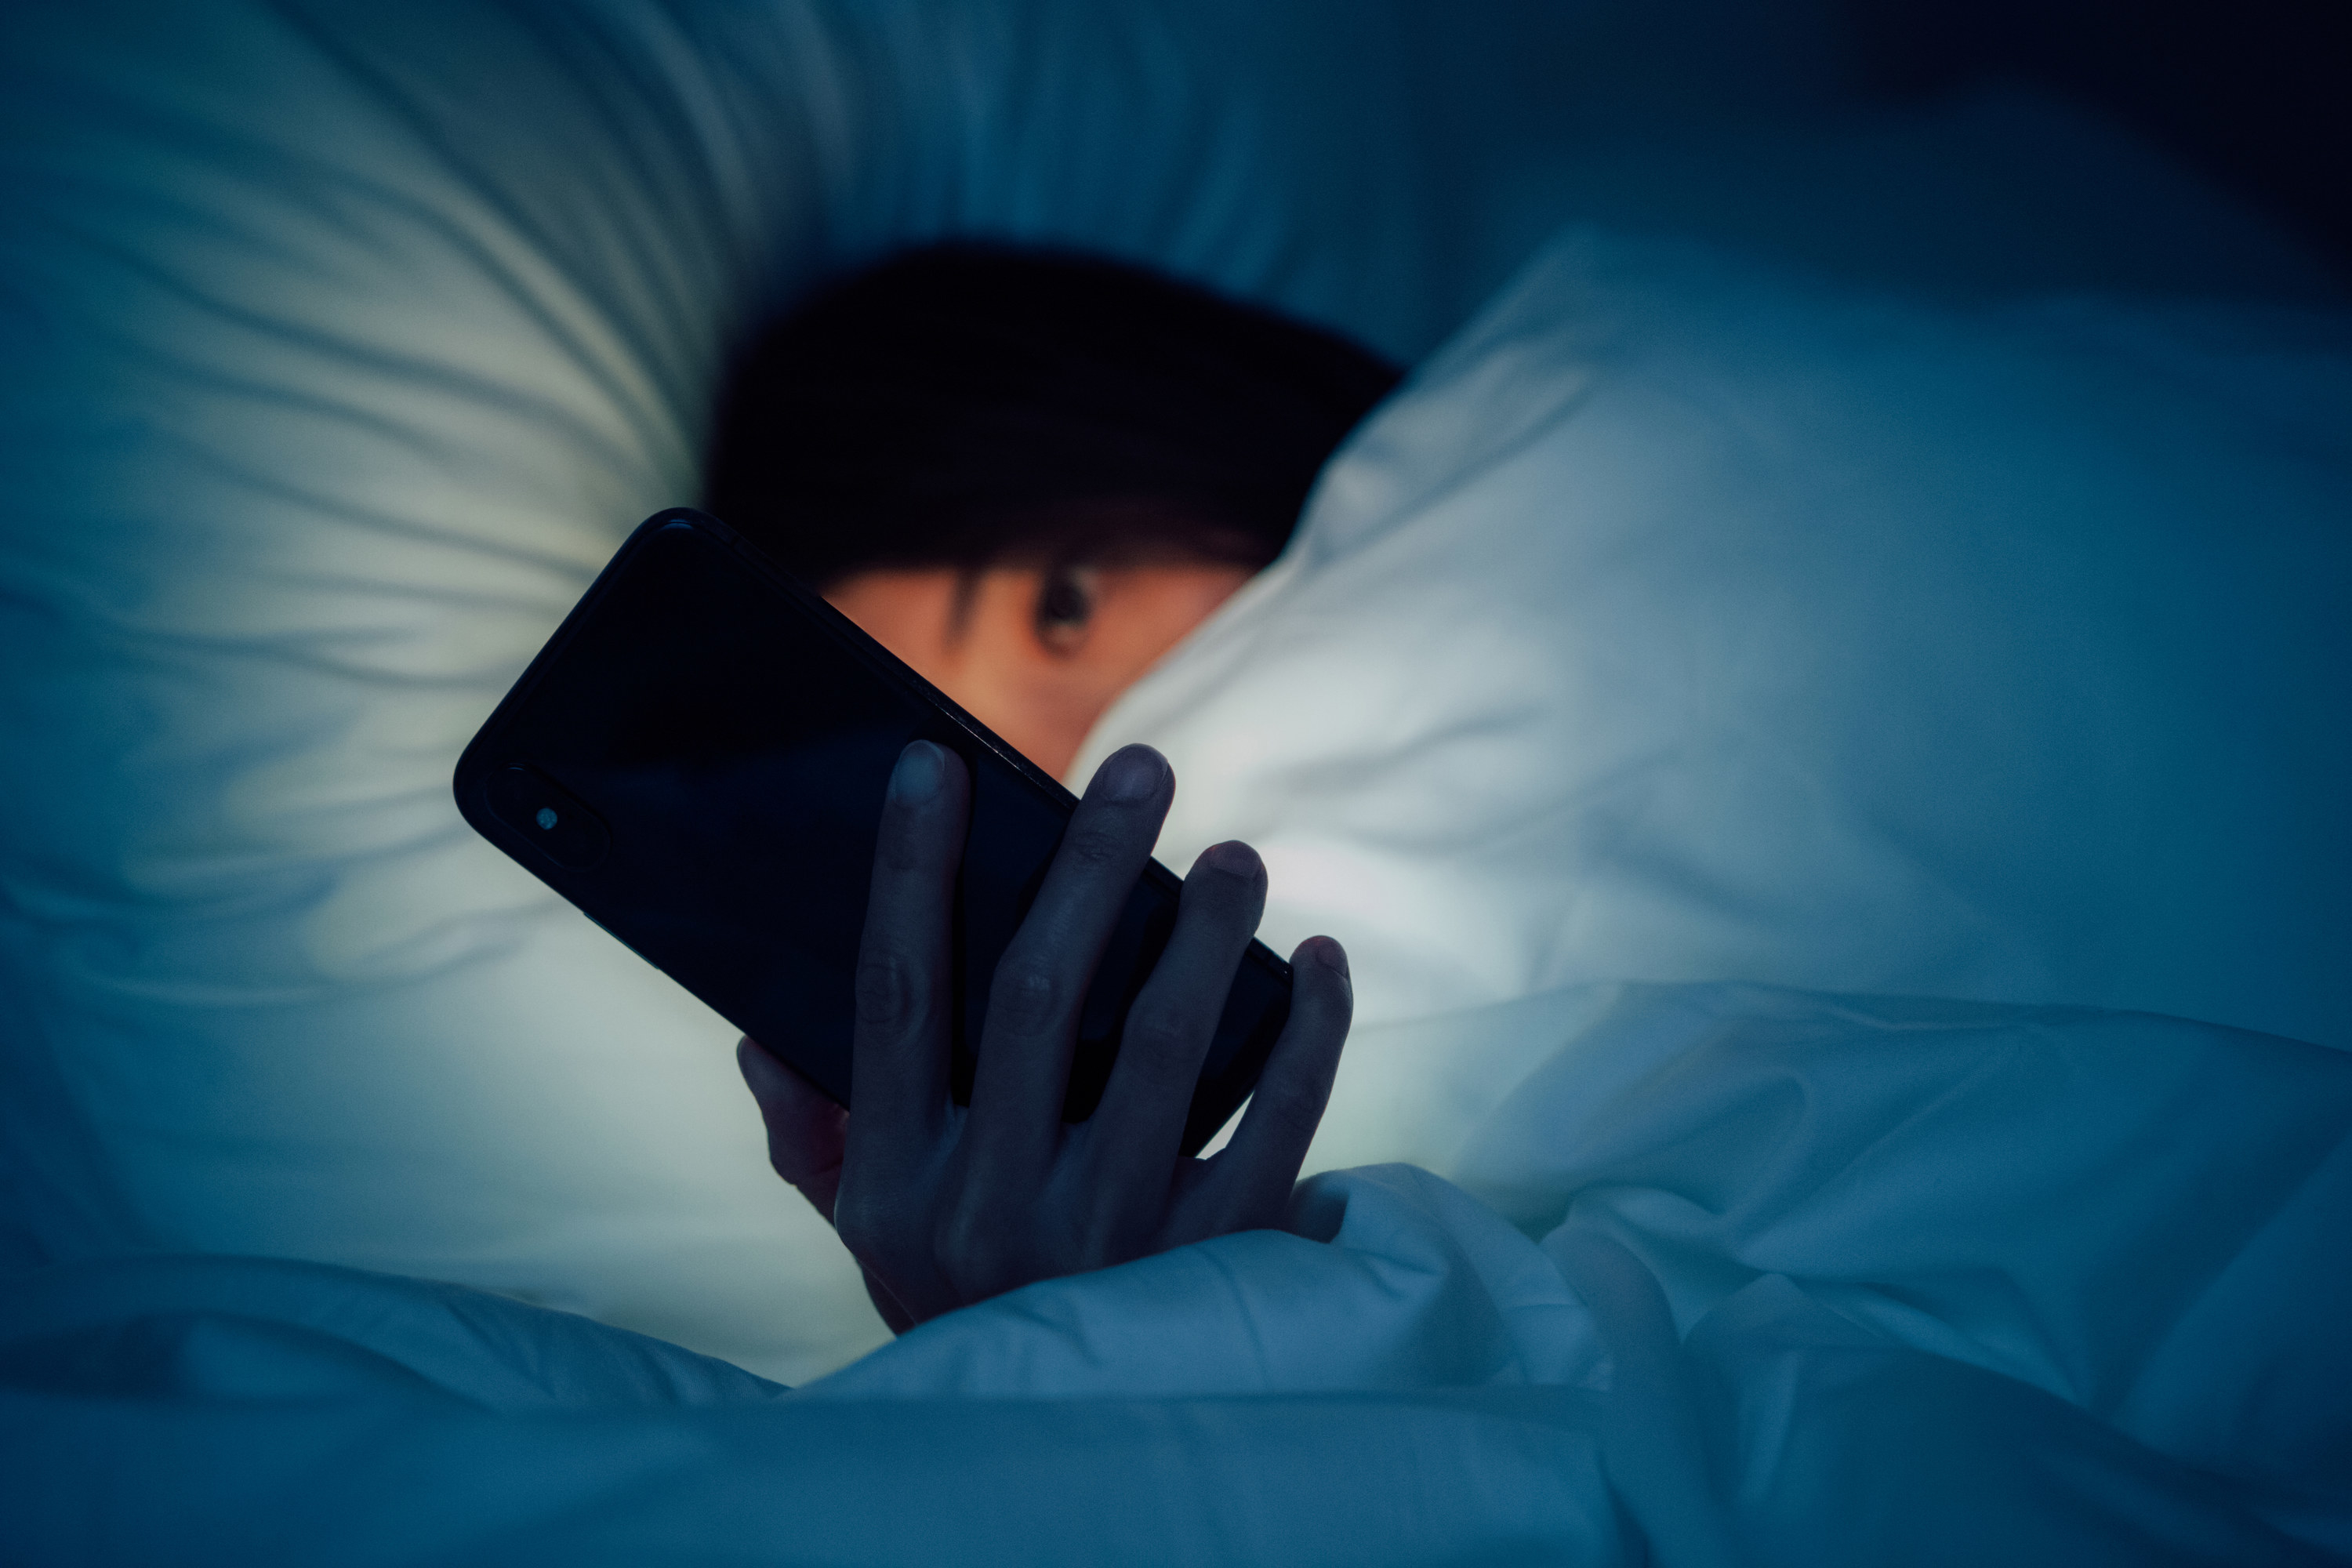 A girl hiding under the blanket in bed looking at her phone